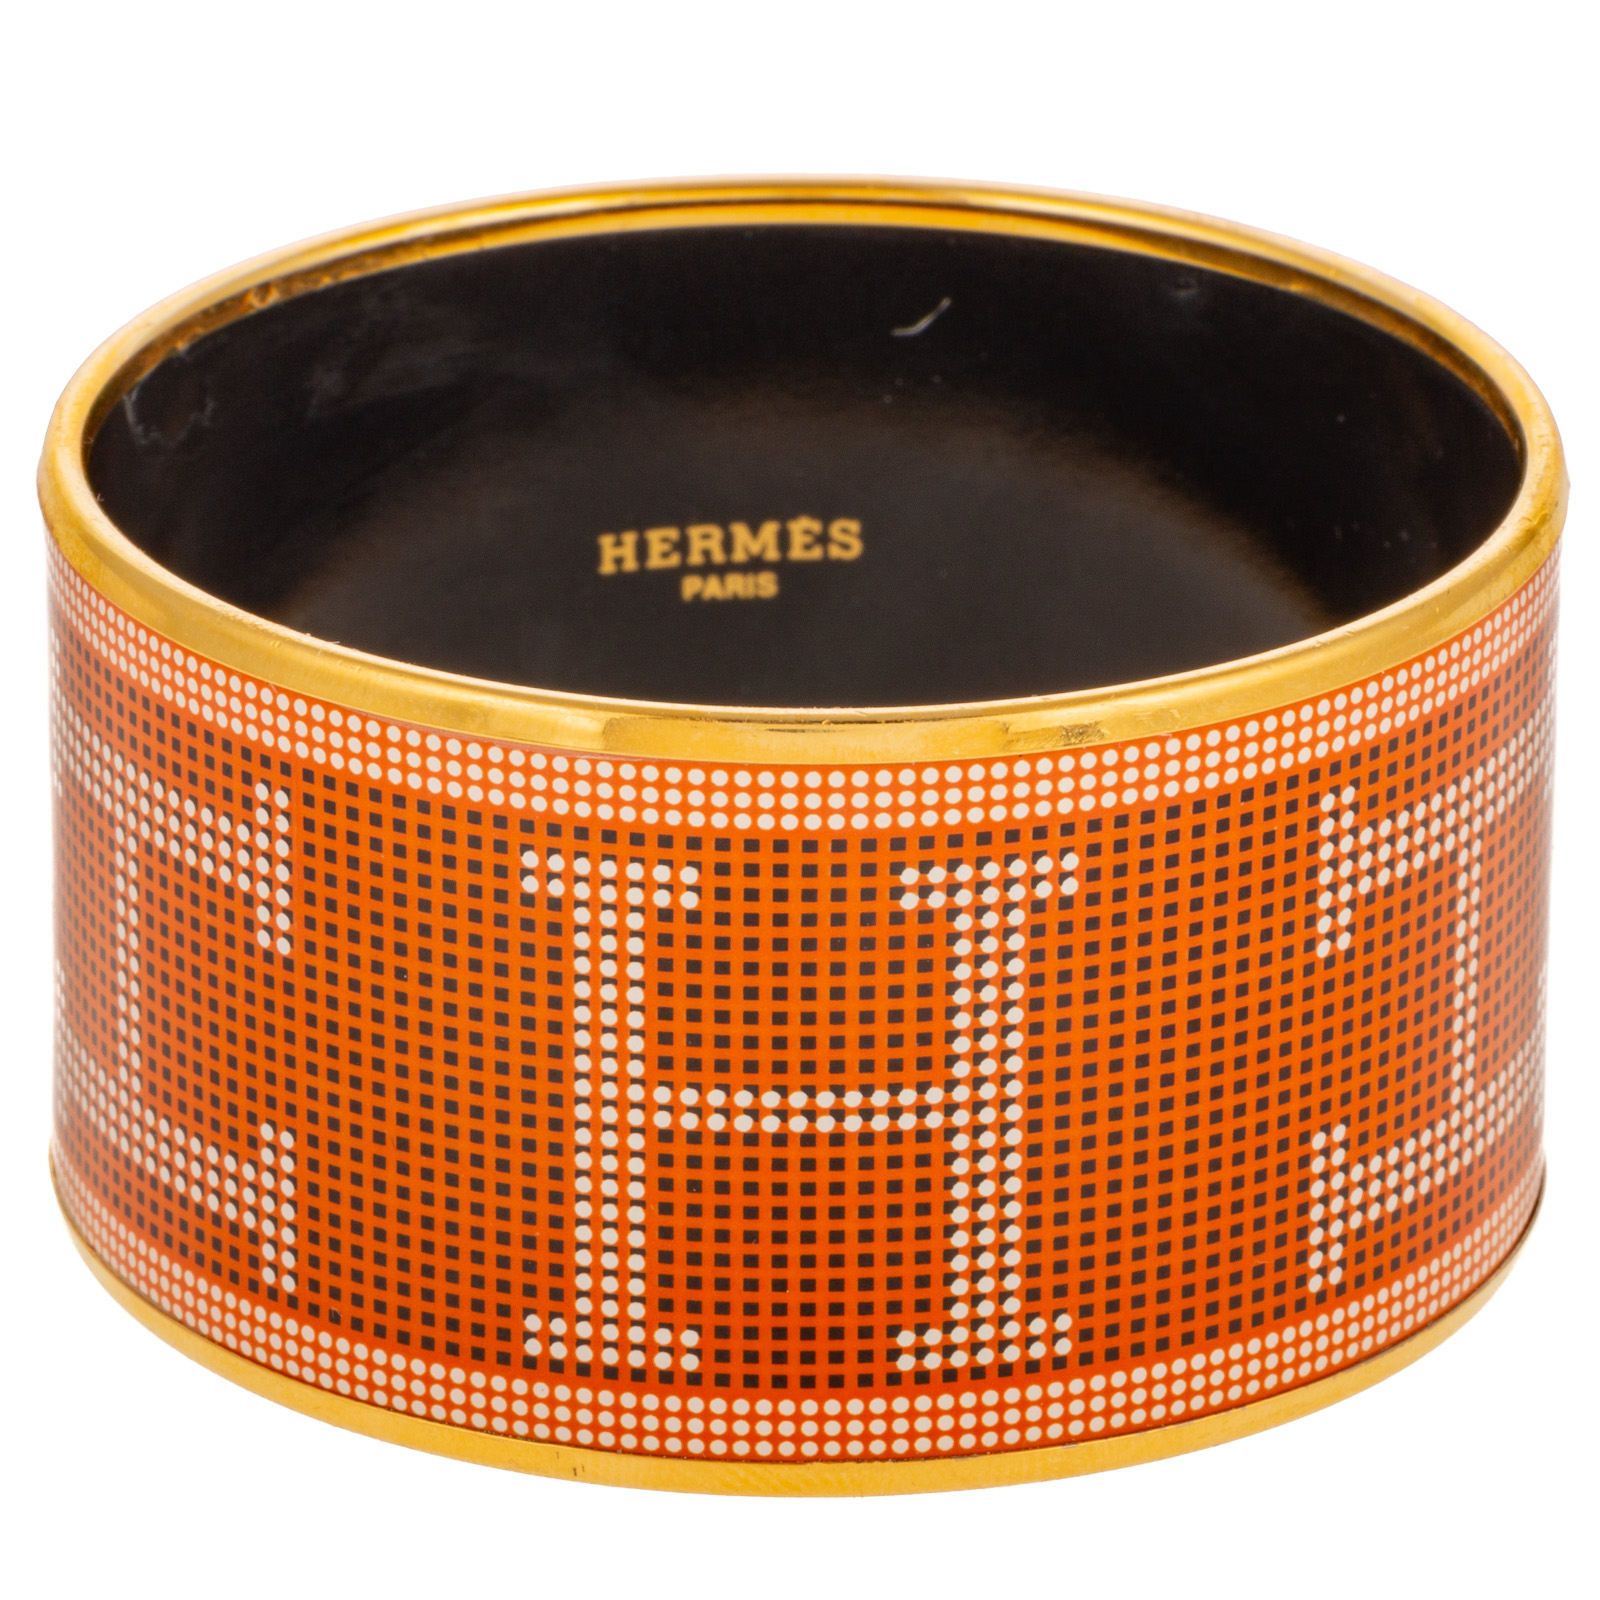 AN HERMES "H" DOT EXTRA WIDE PRINTED